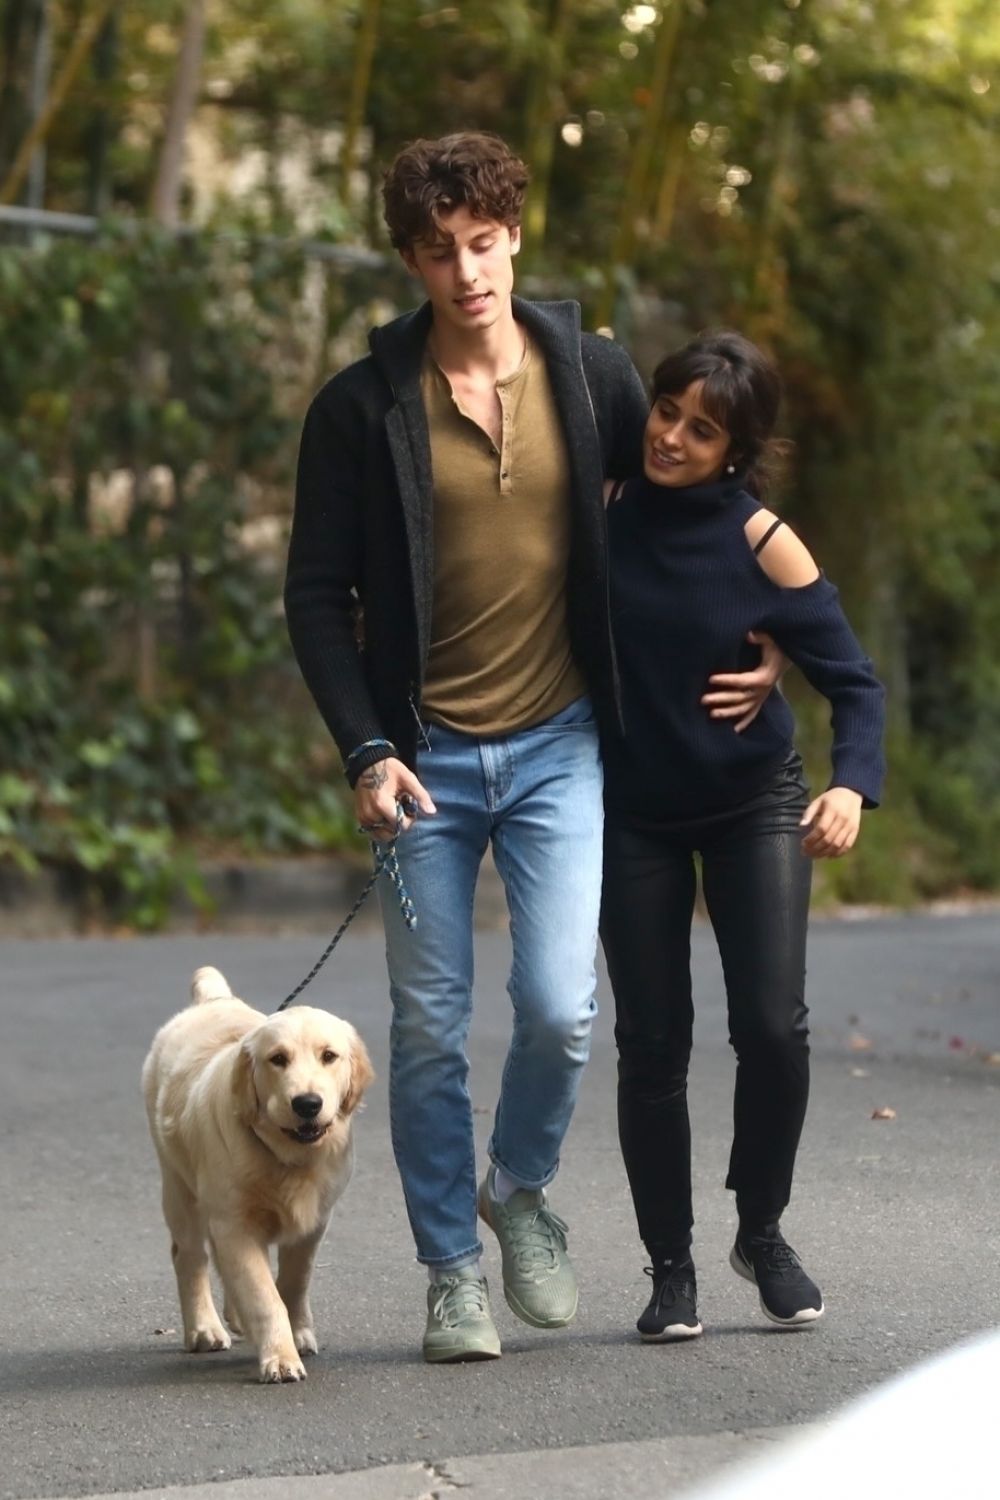 camila-cabello-and-shawn-mendes-out-with-their-dog-in-los-angeles-03-21-2021-4.jpg